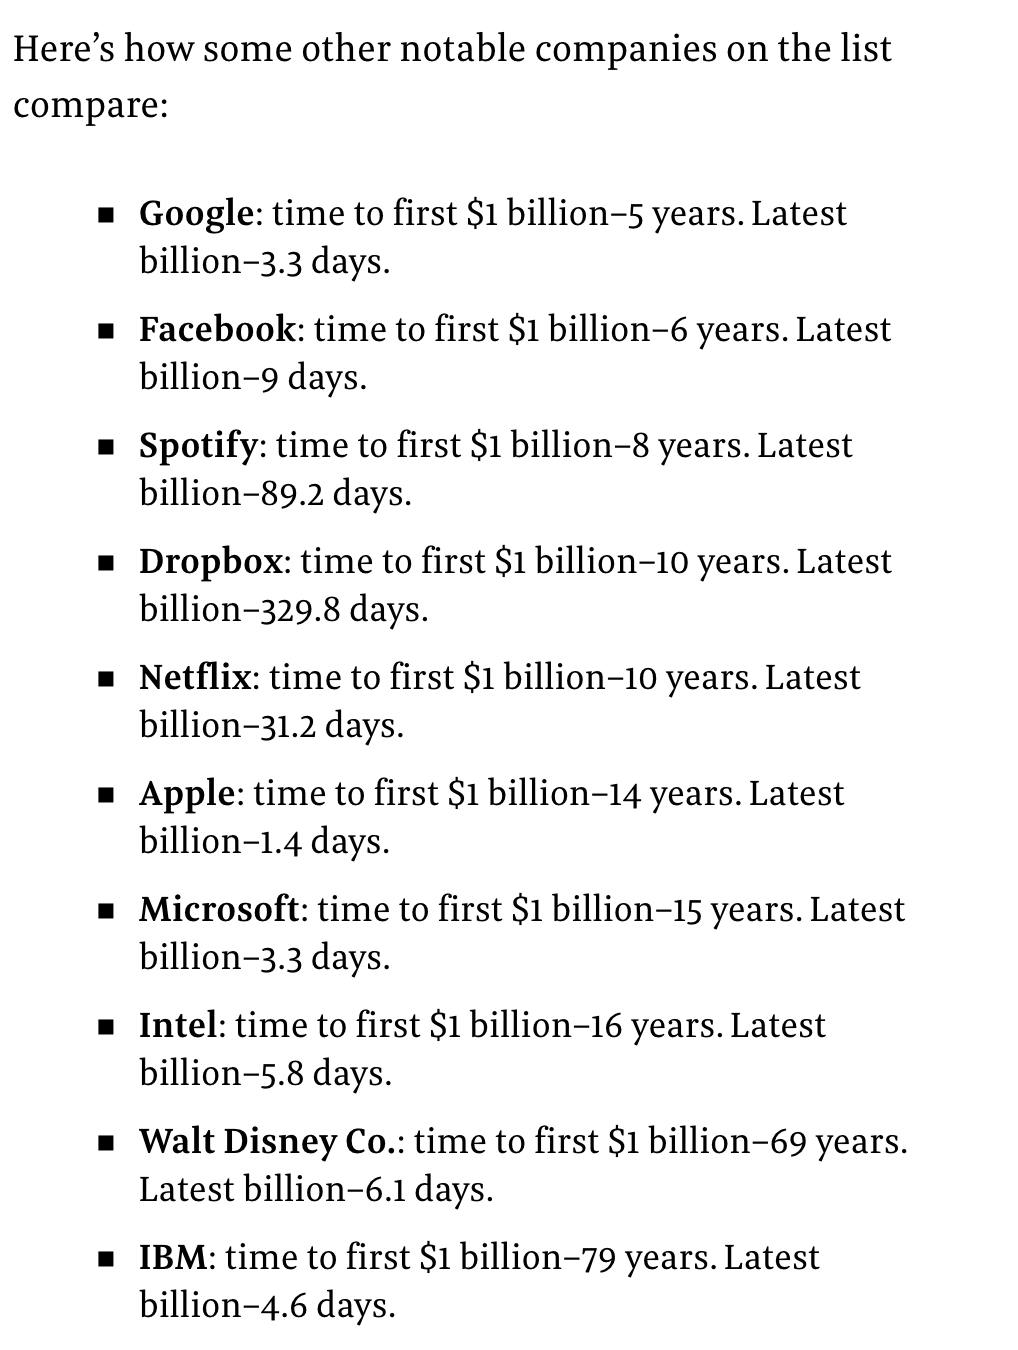 List of well-known companies' time to first billion